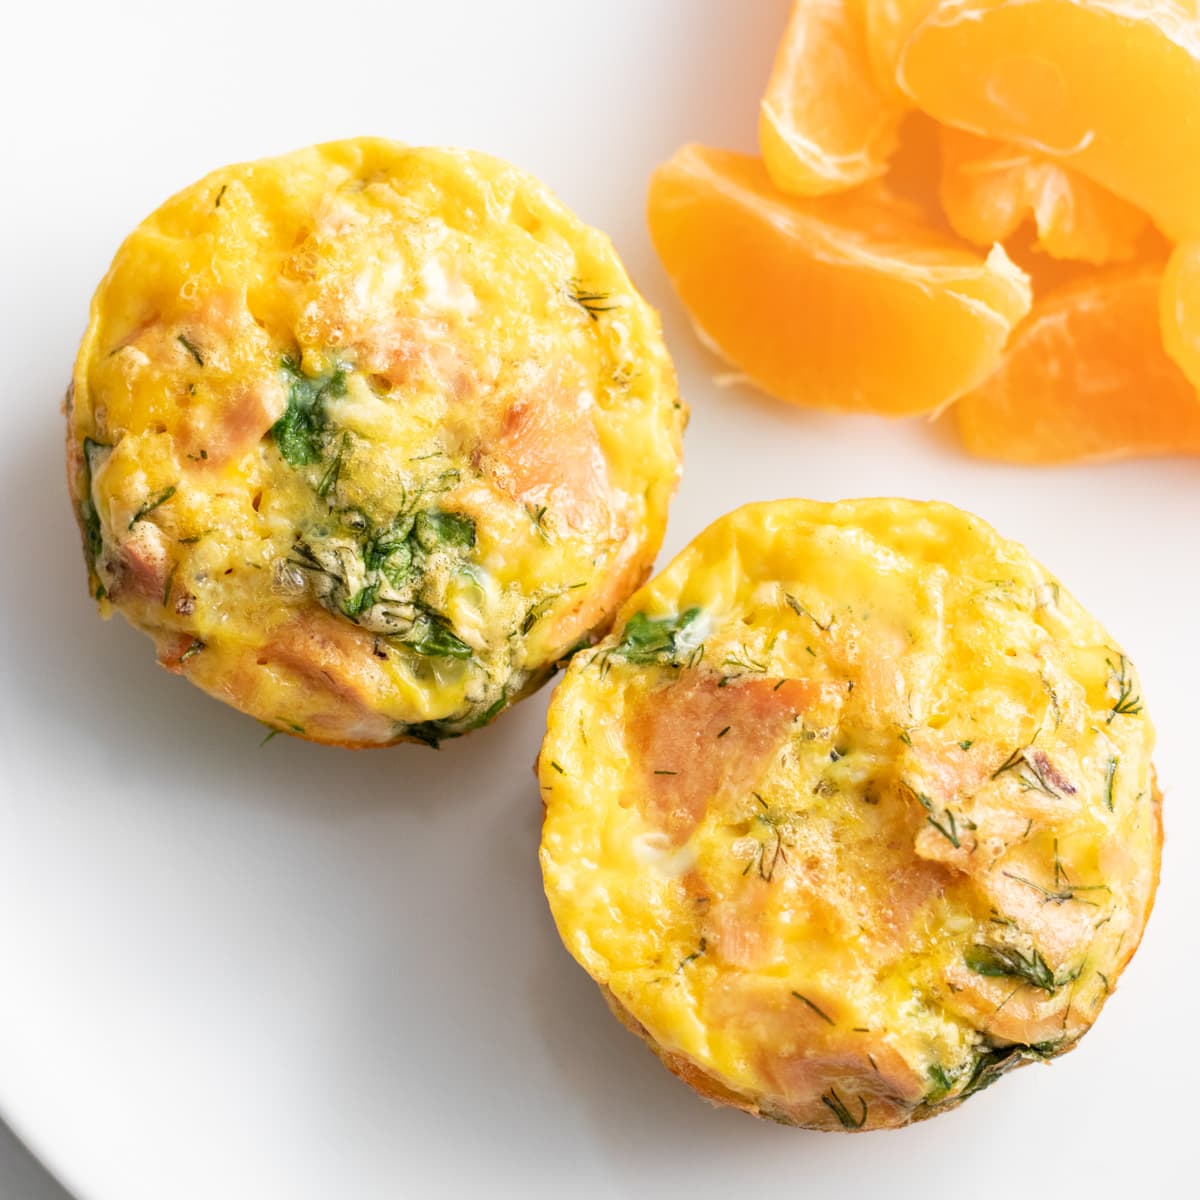 Two egg muffins made with smoked salmon, dill and spinach sit on a small white plate with orange segments.